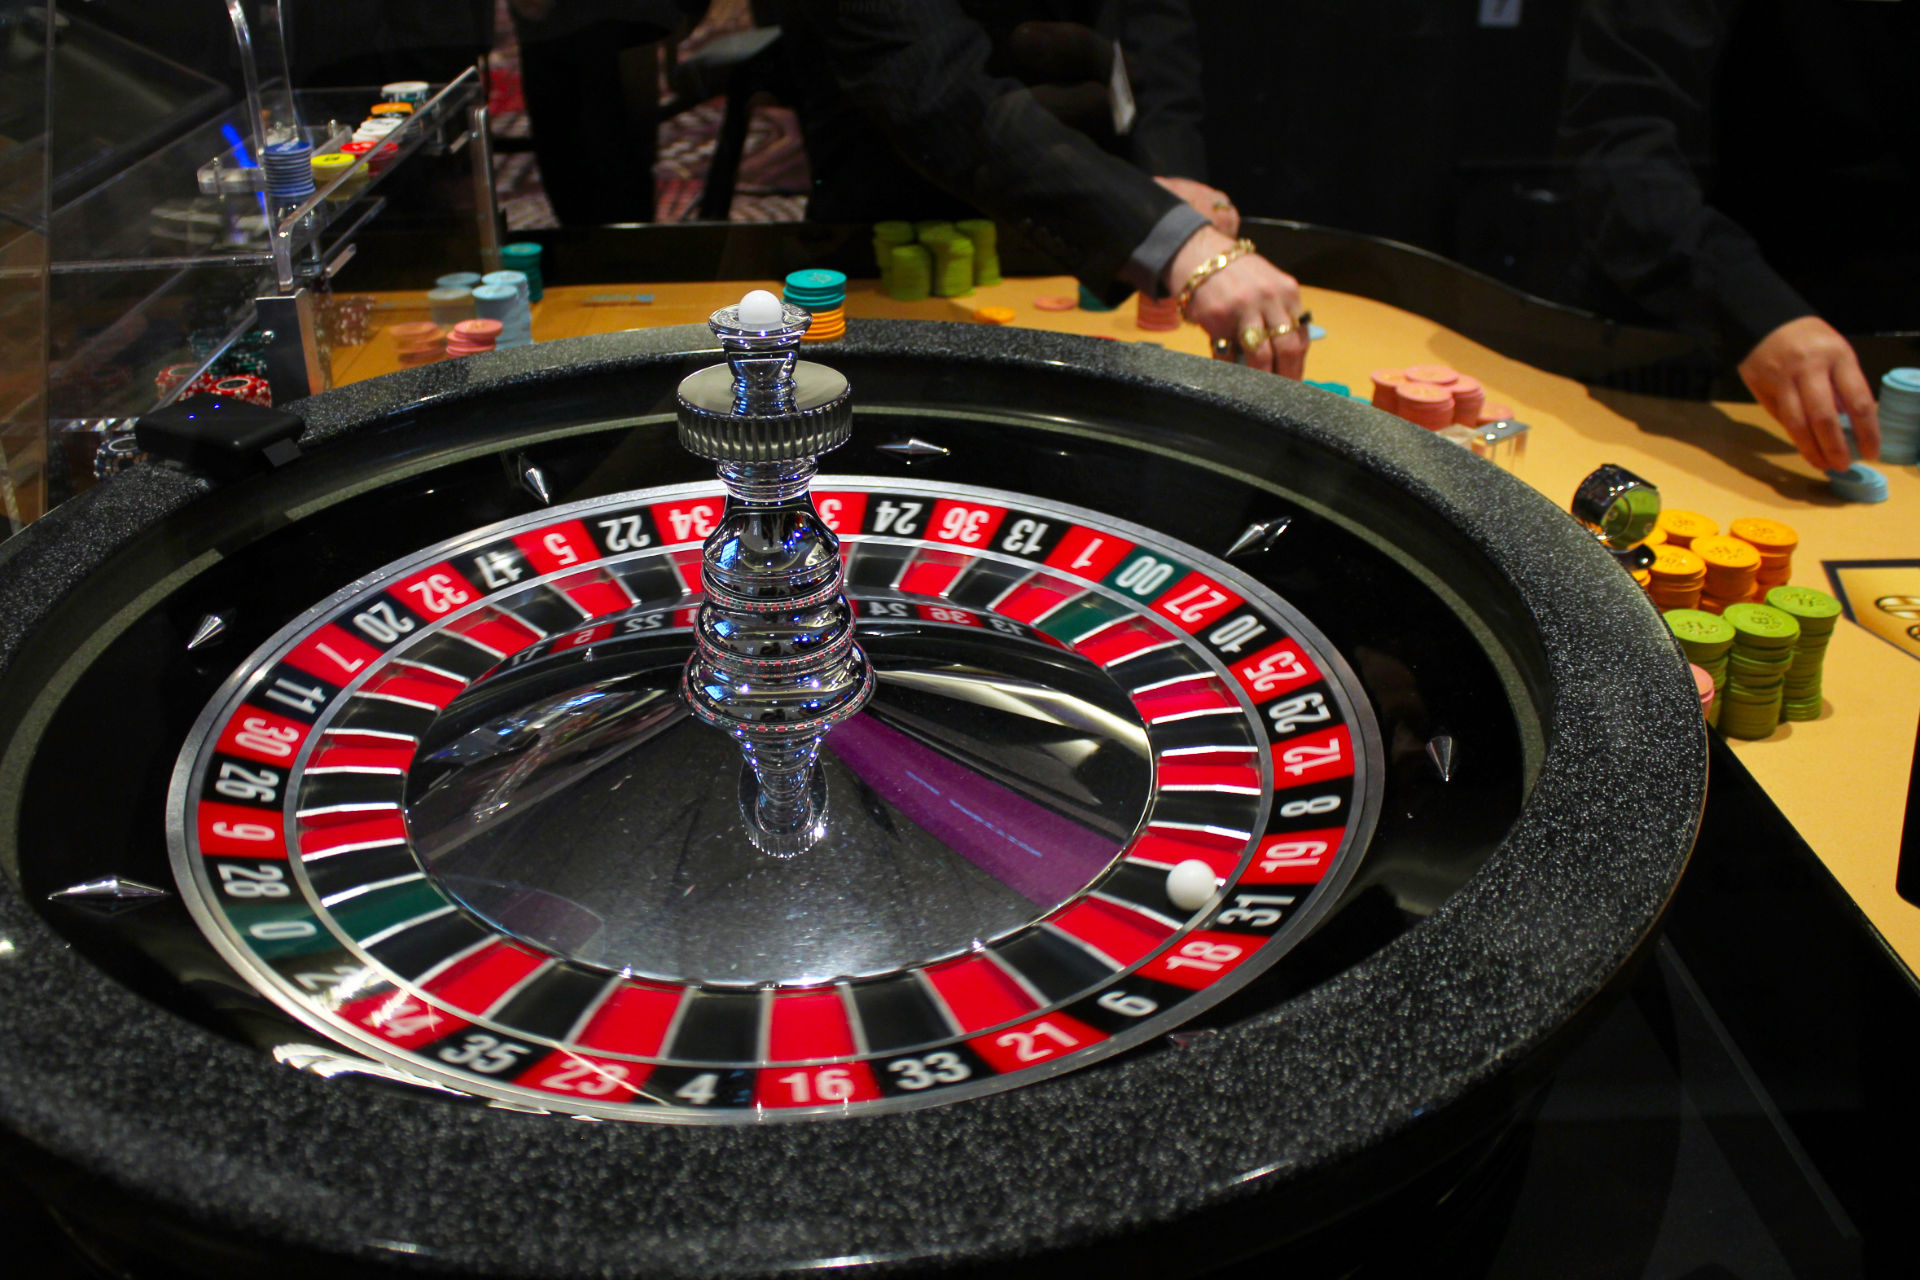 Popular Online Casino Games and Their Odds